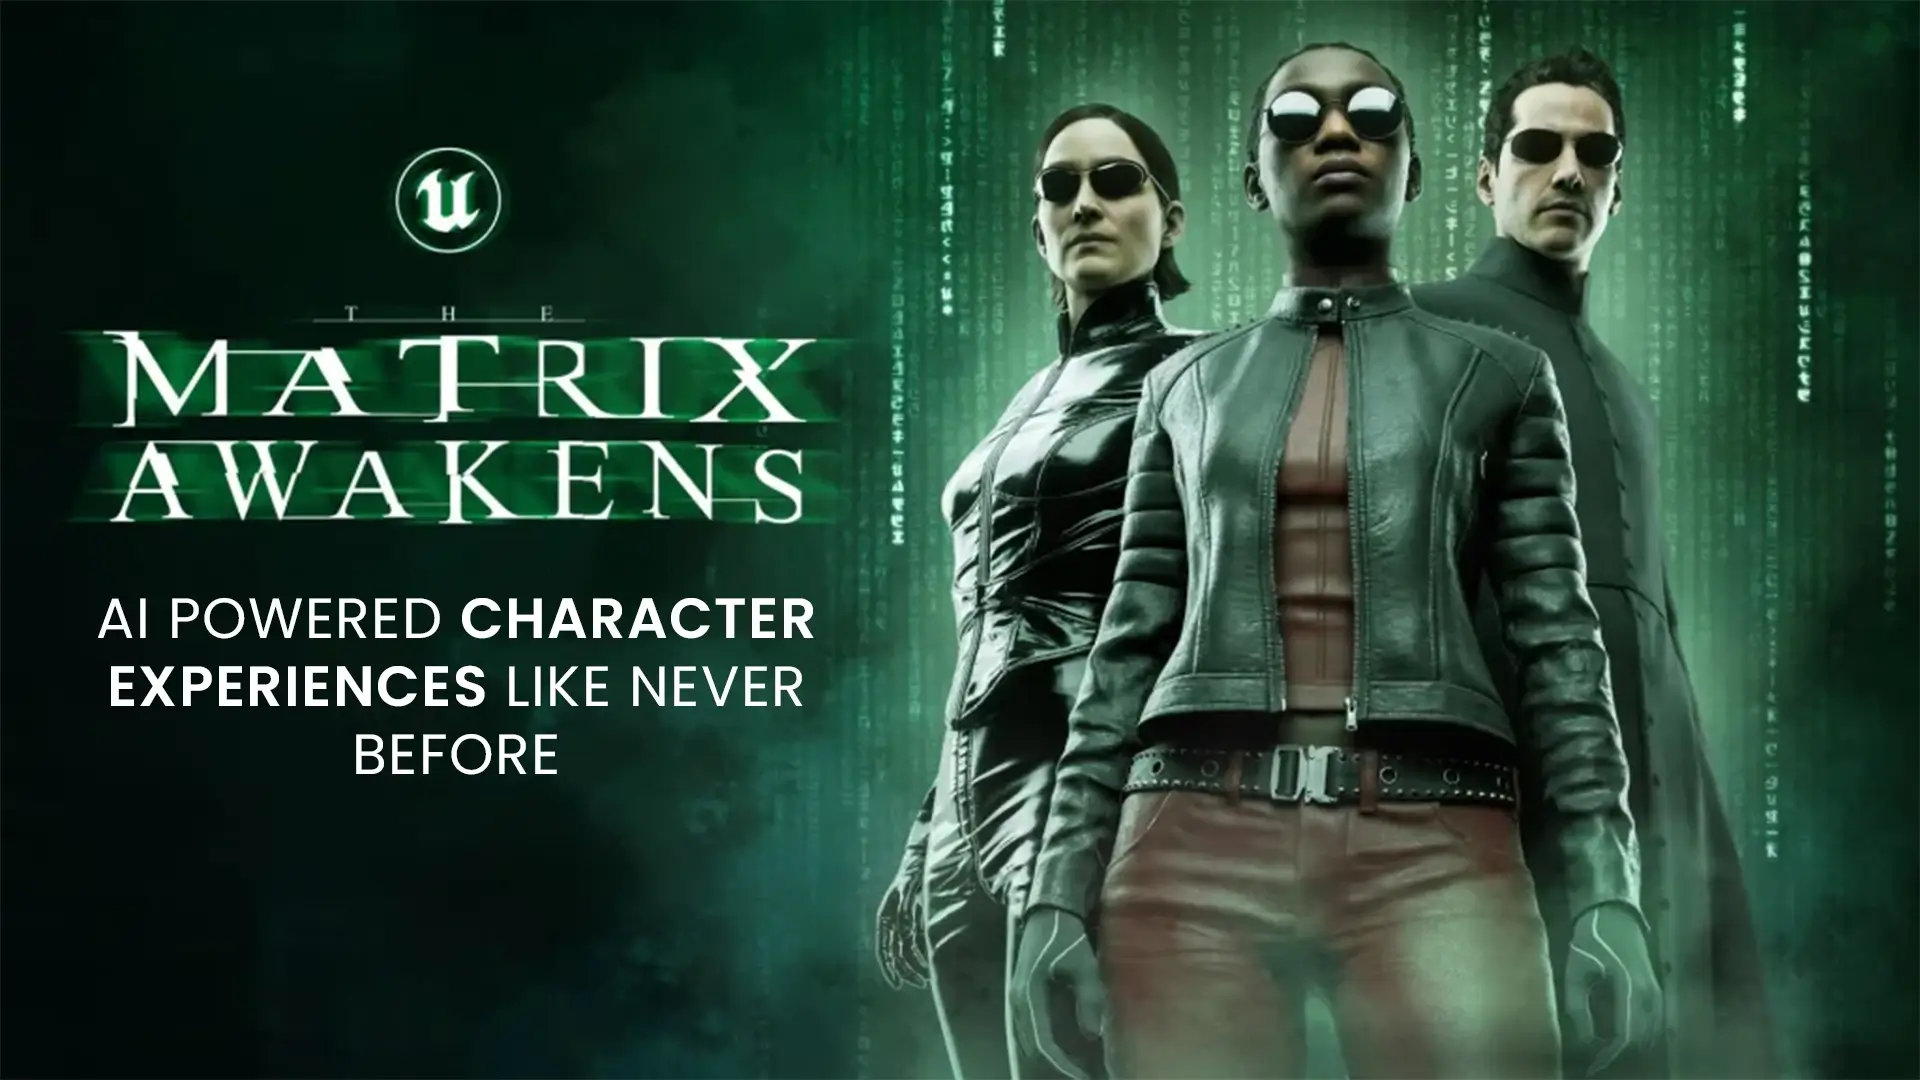 3 Matrix characters, Neo, Trinity, and the main game avatar standing together on the right, and game title “The MATRIX AWAKENS” on the left with subtitle “AI powered character experiences like never before” and an Unreal Engine logo.